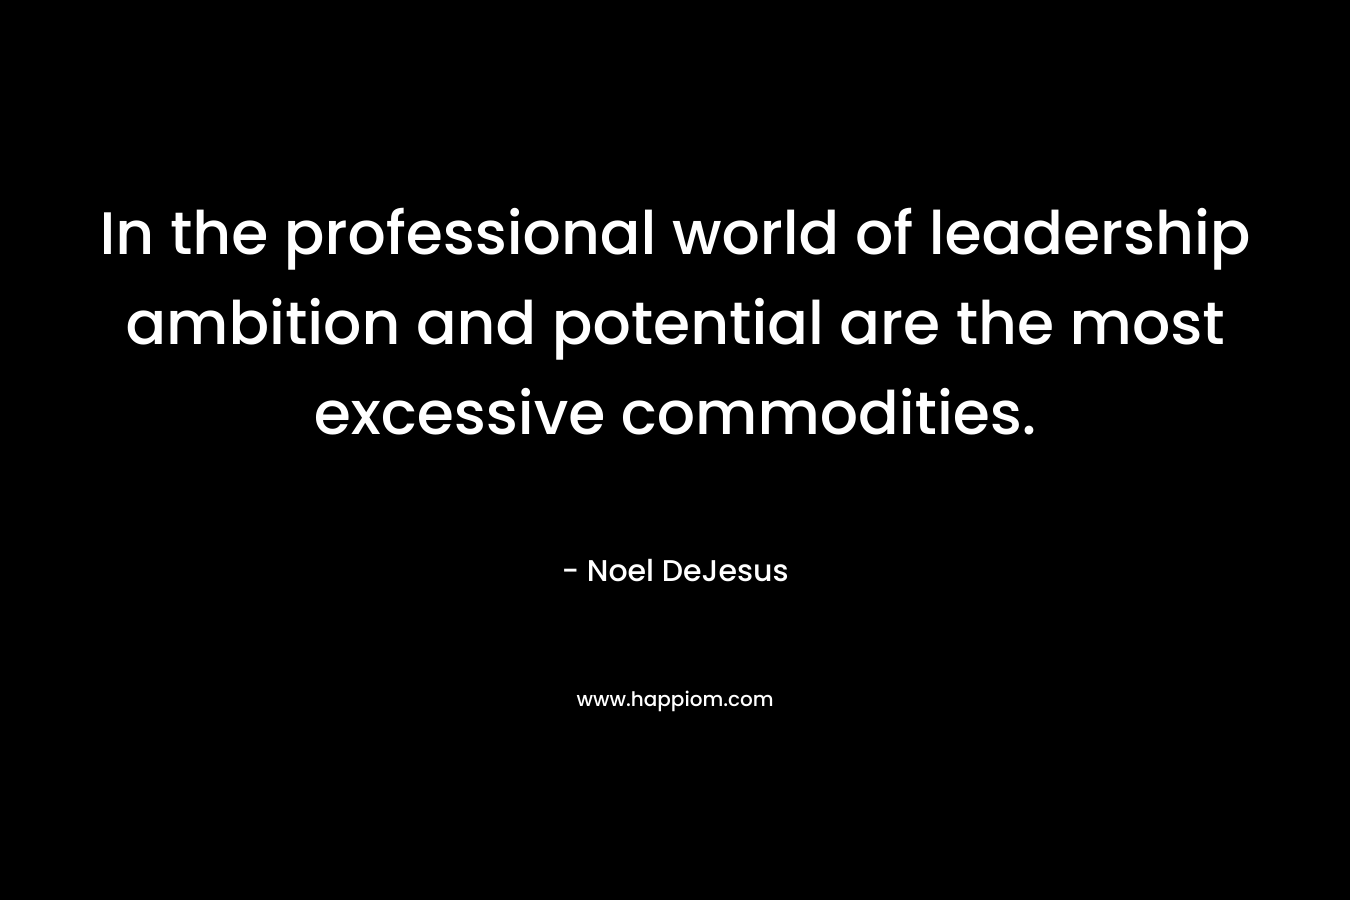 In the professional world of leadership ambition and potential are the most excessive commodities.